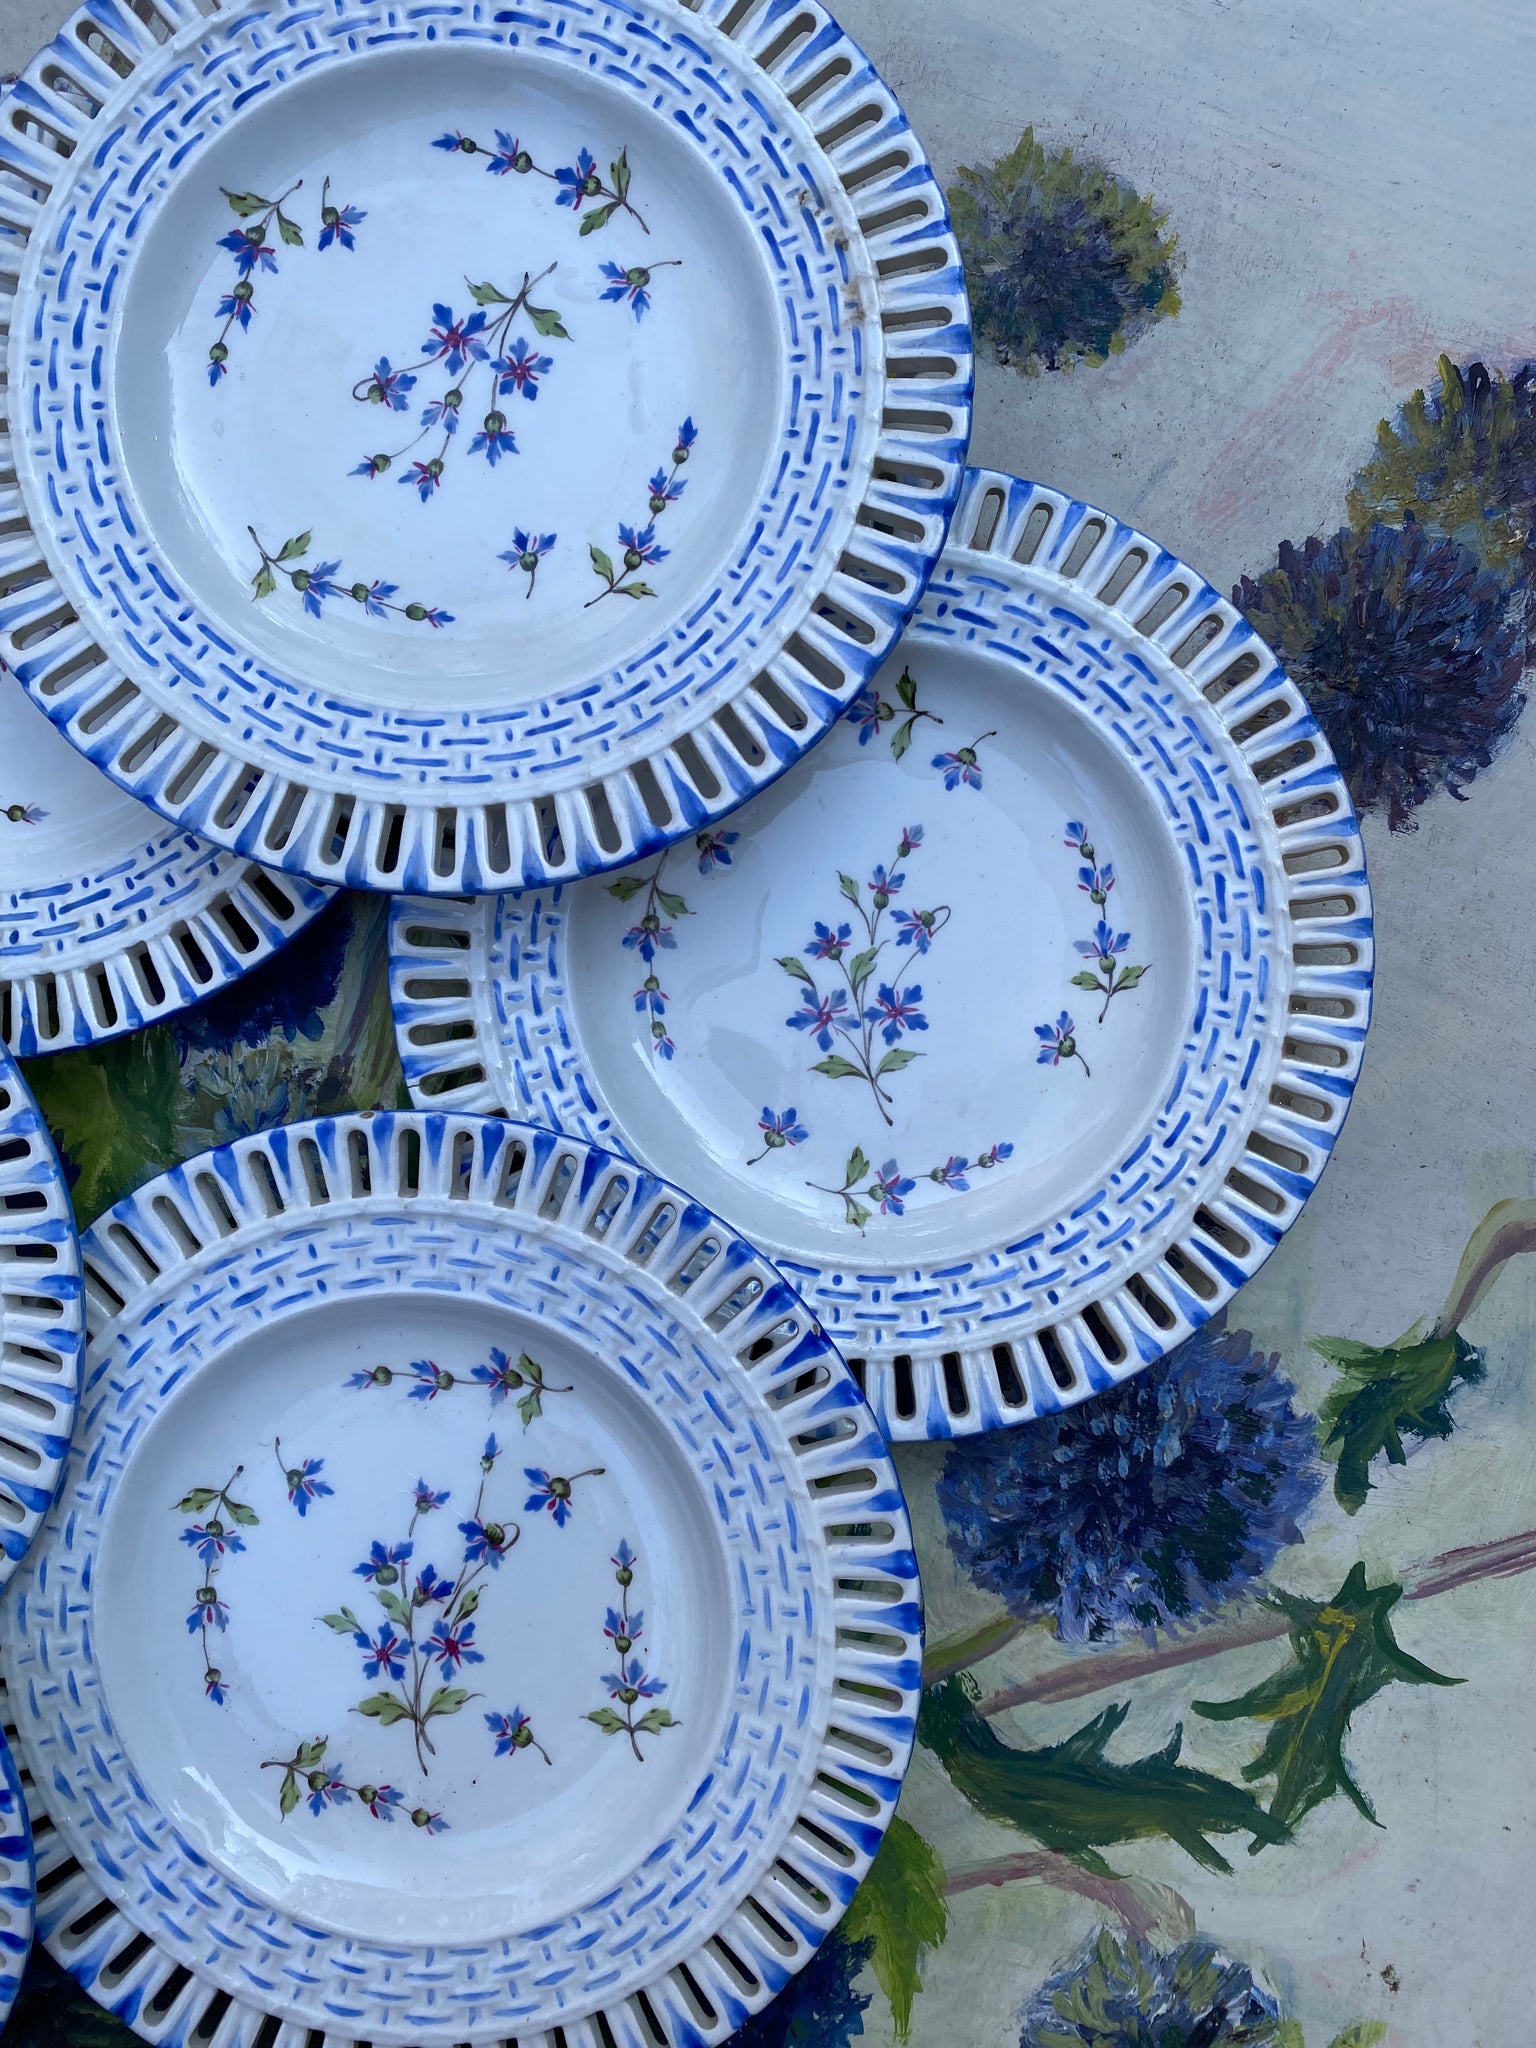 French Handpainted Reticulated Plates, S/6